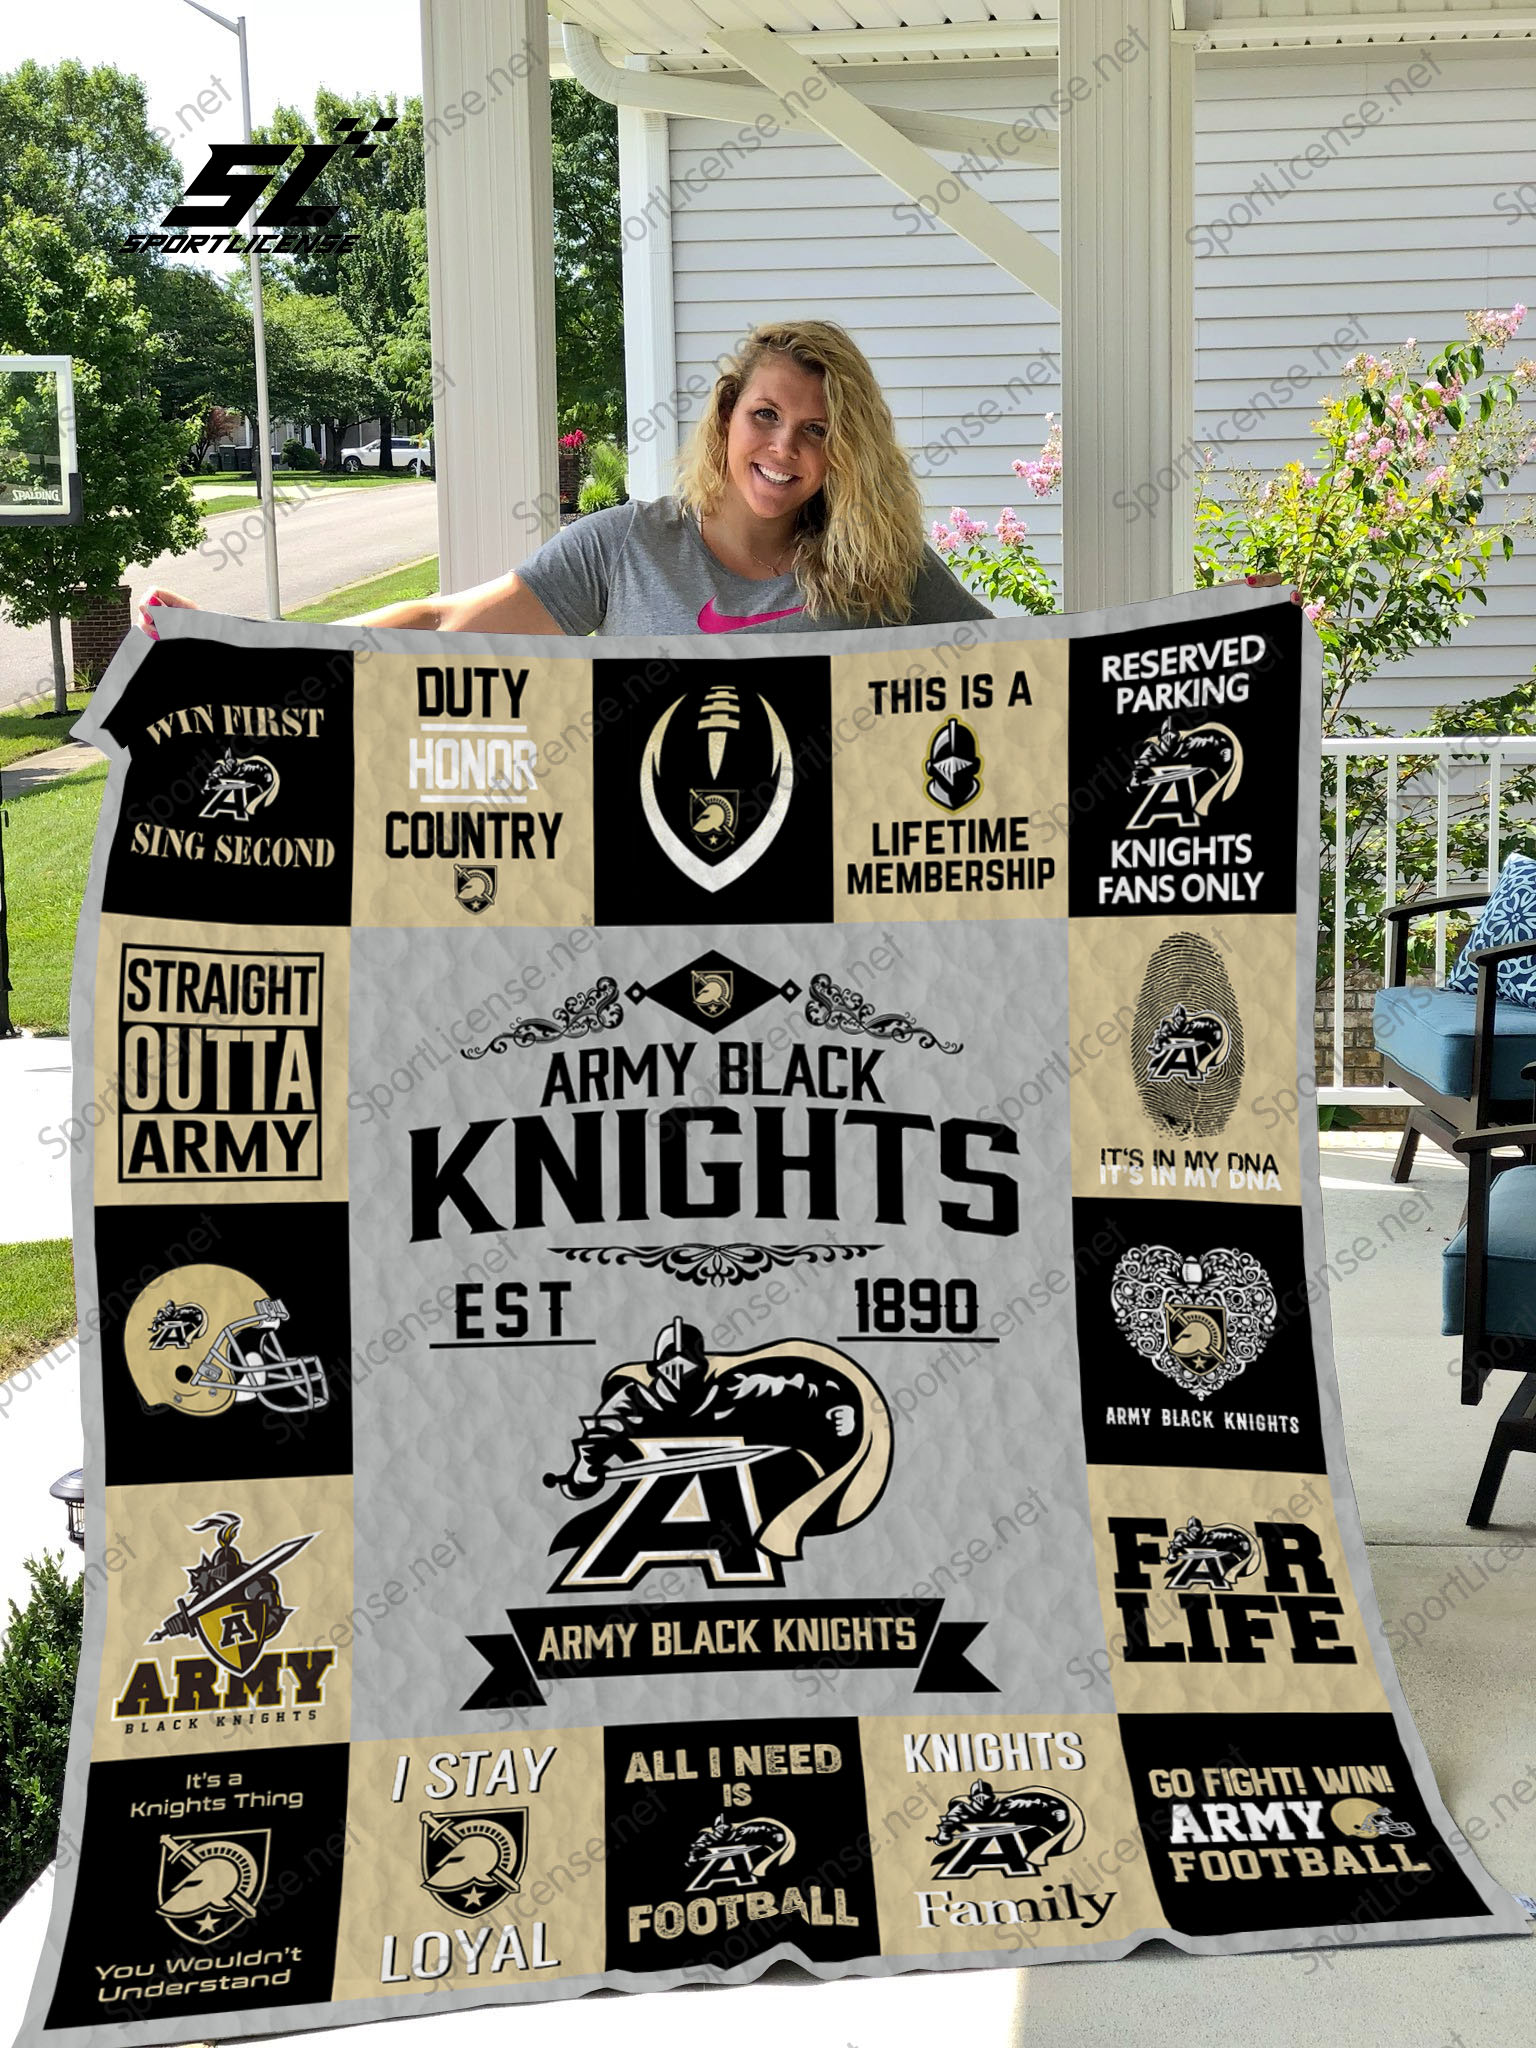 Army black knights quilt 2